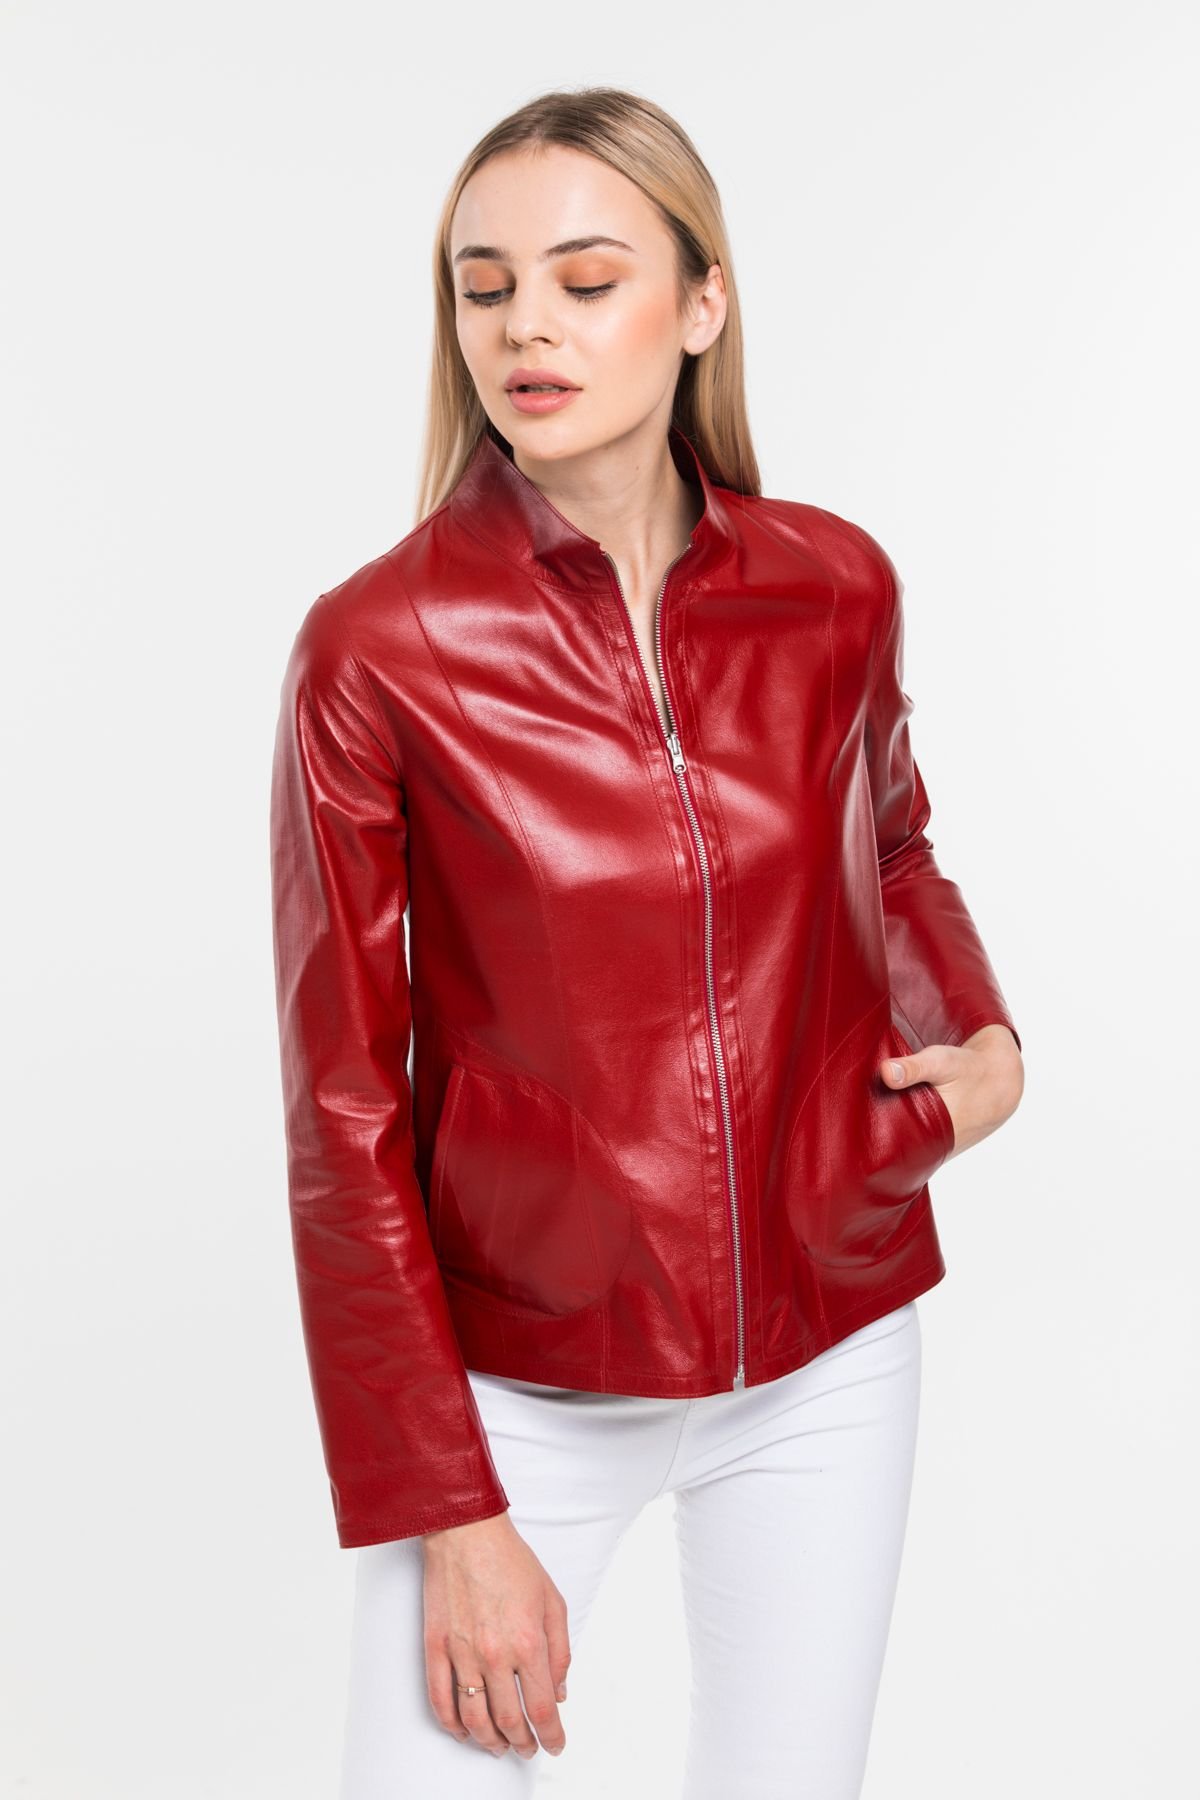 Reversible Leather Jacket for Ladies